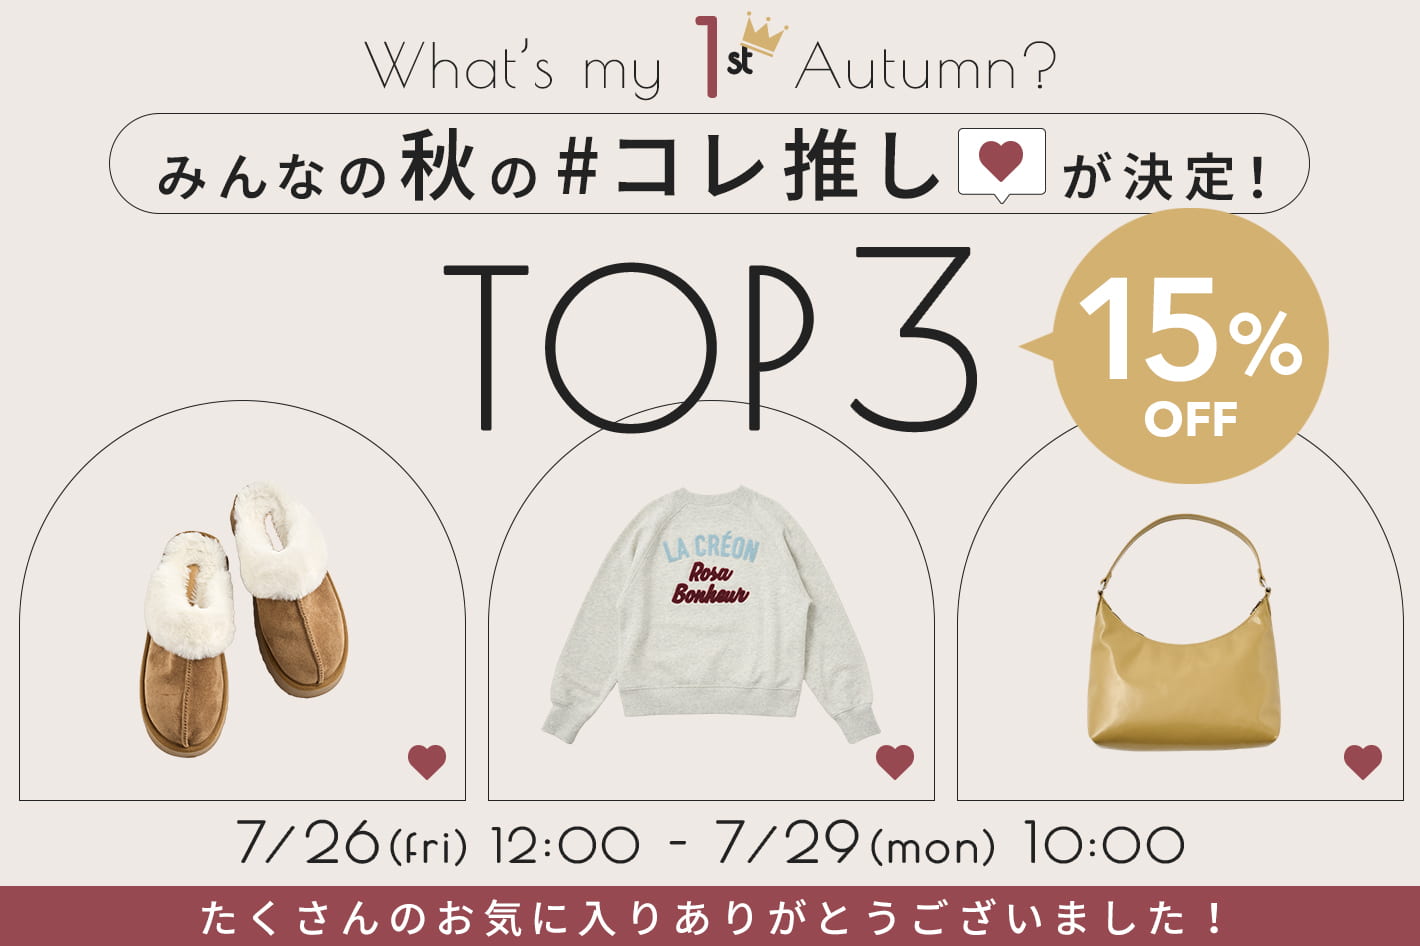 DISCOAT 【15％OFF♪】みんなの秋の＃コレ推しTOP3が決定♡